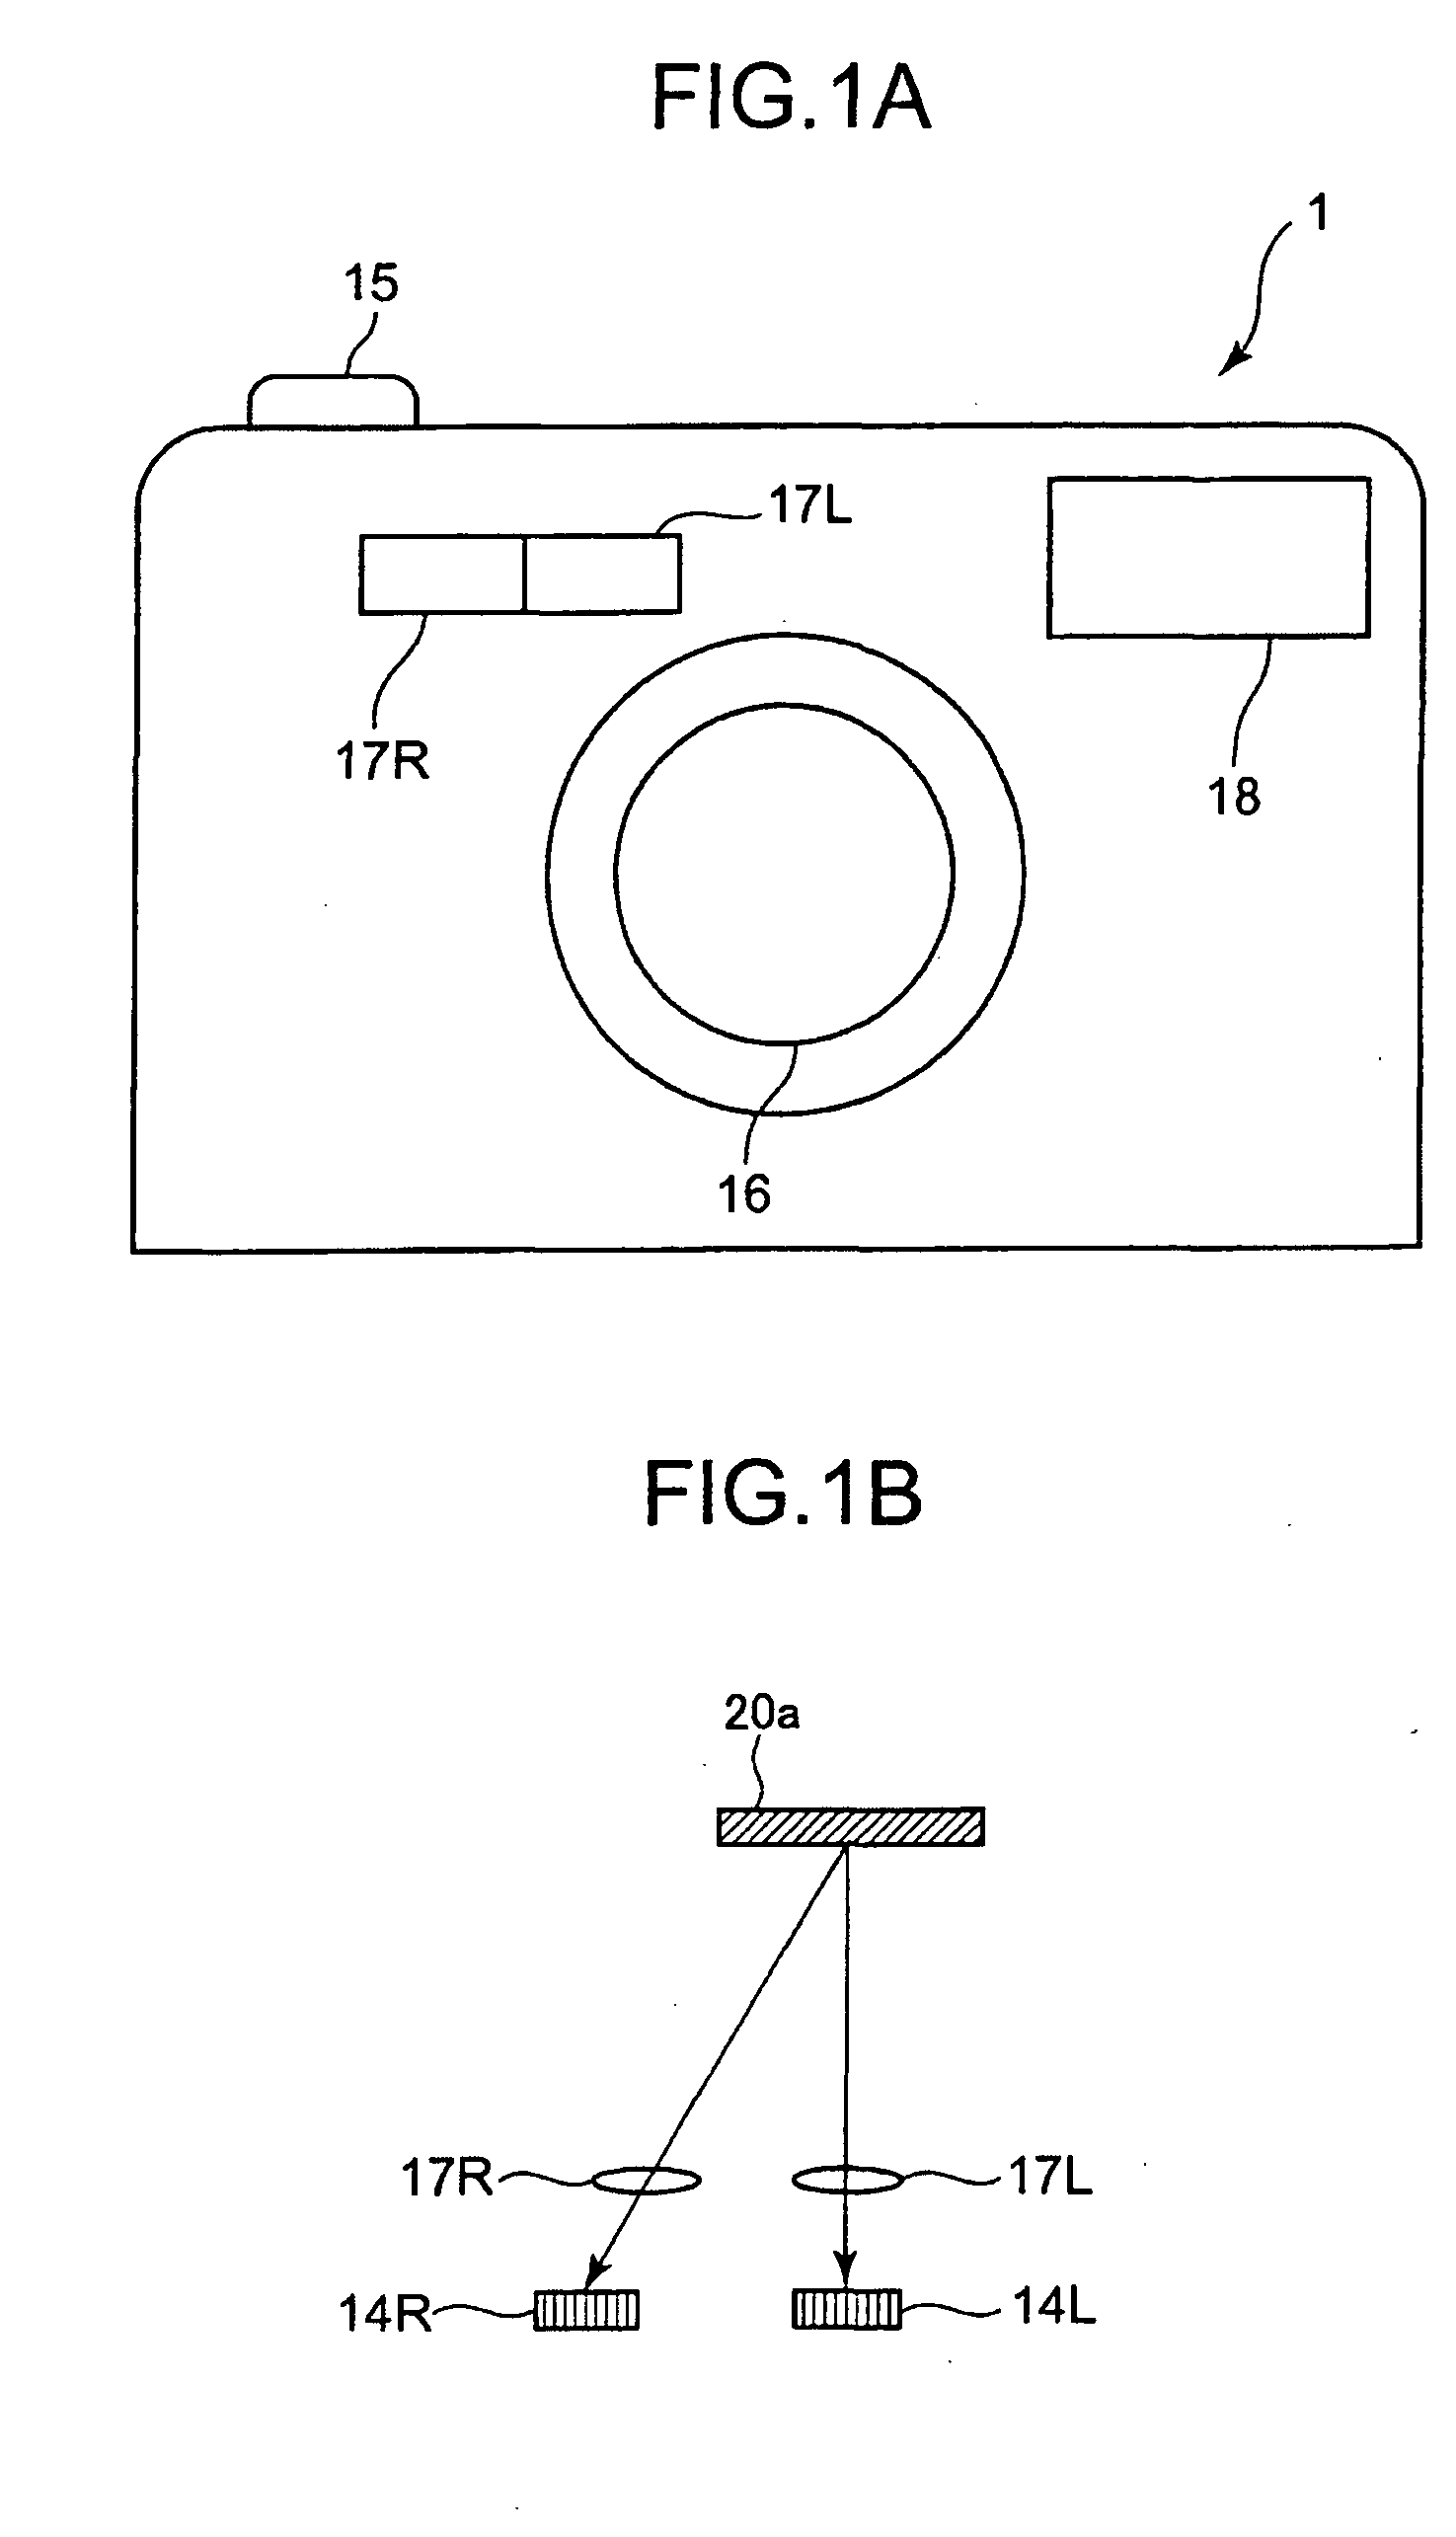 Electronic camera equipped with an automatic focusing function